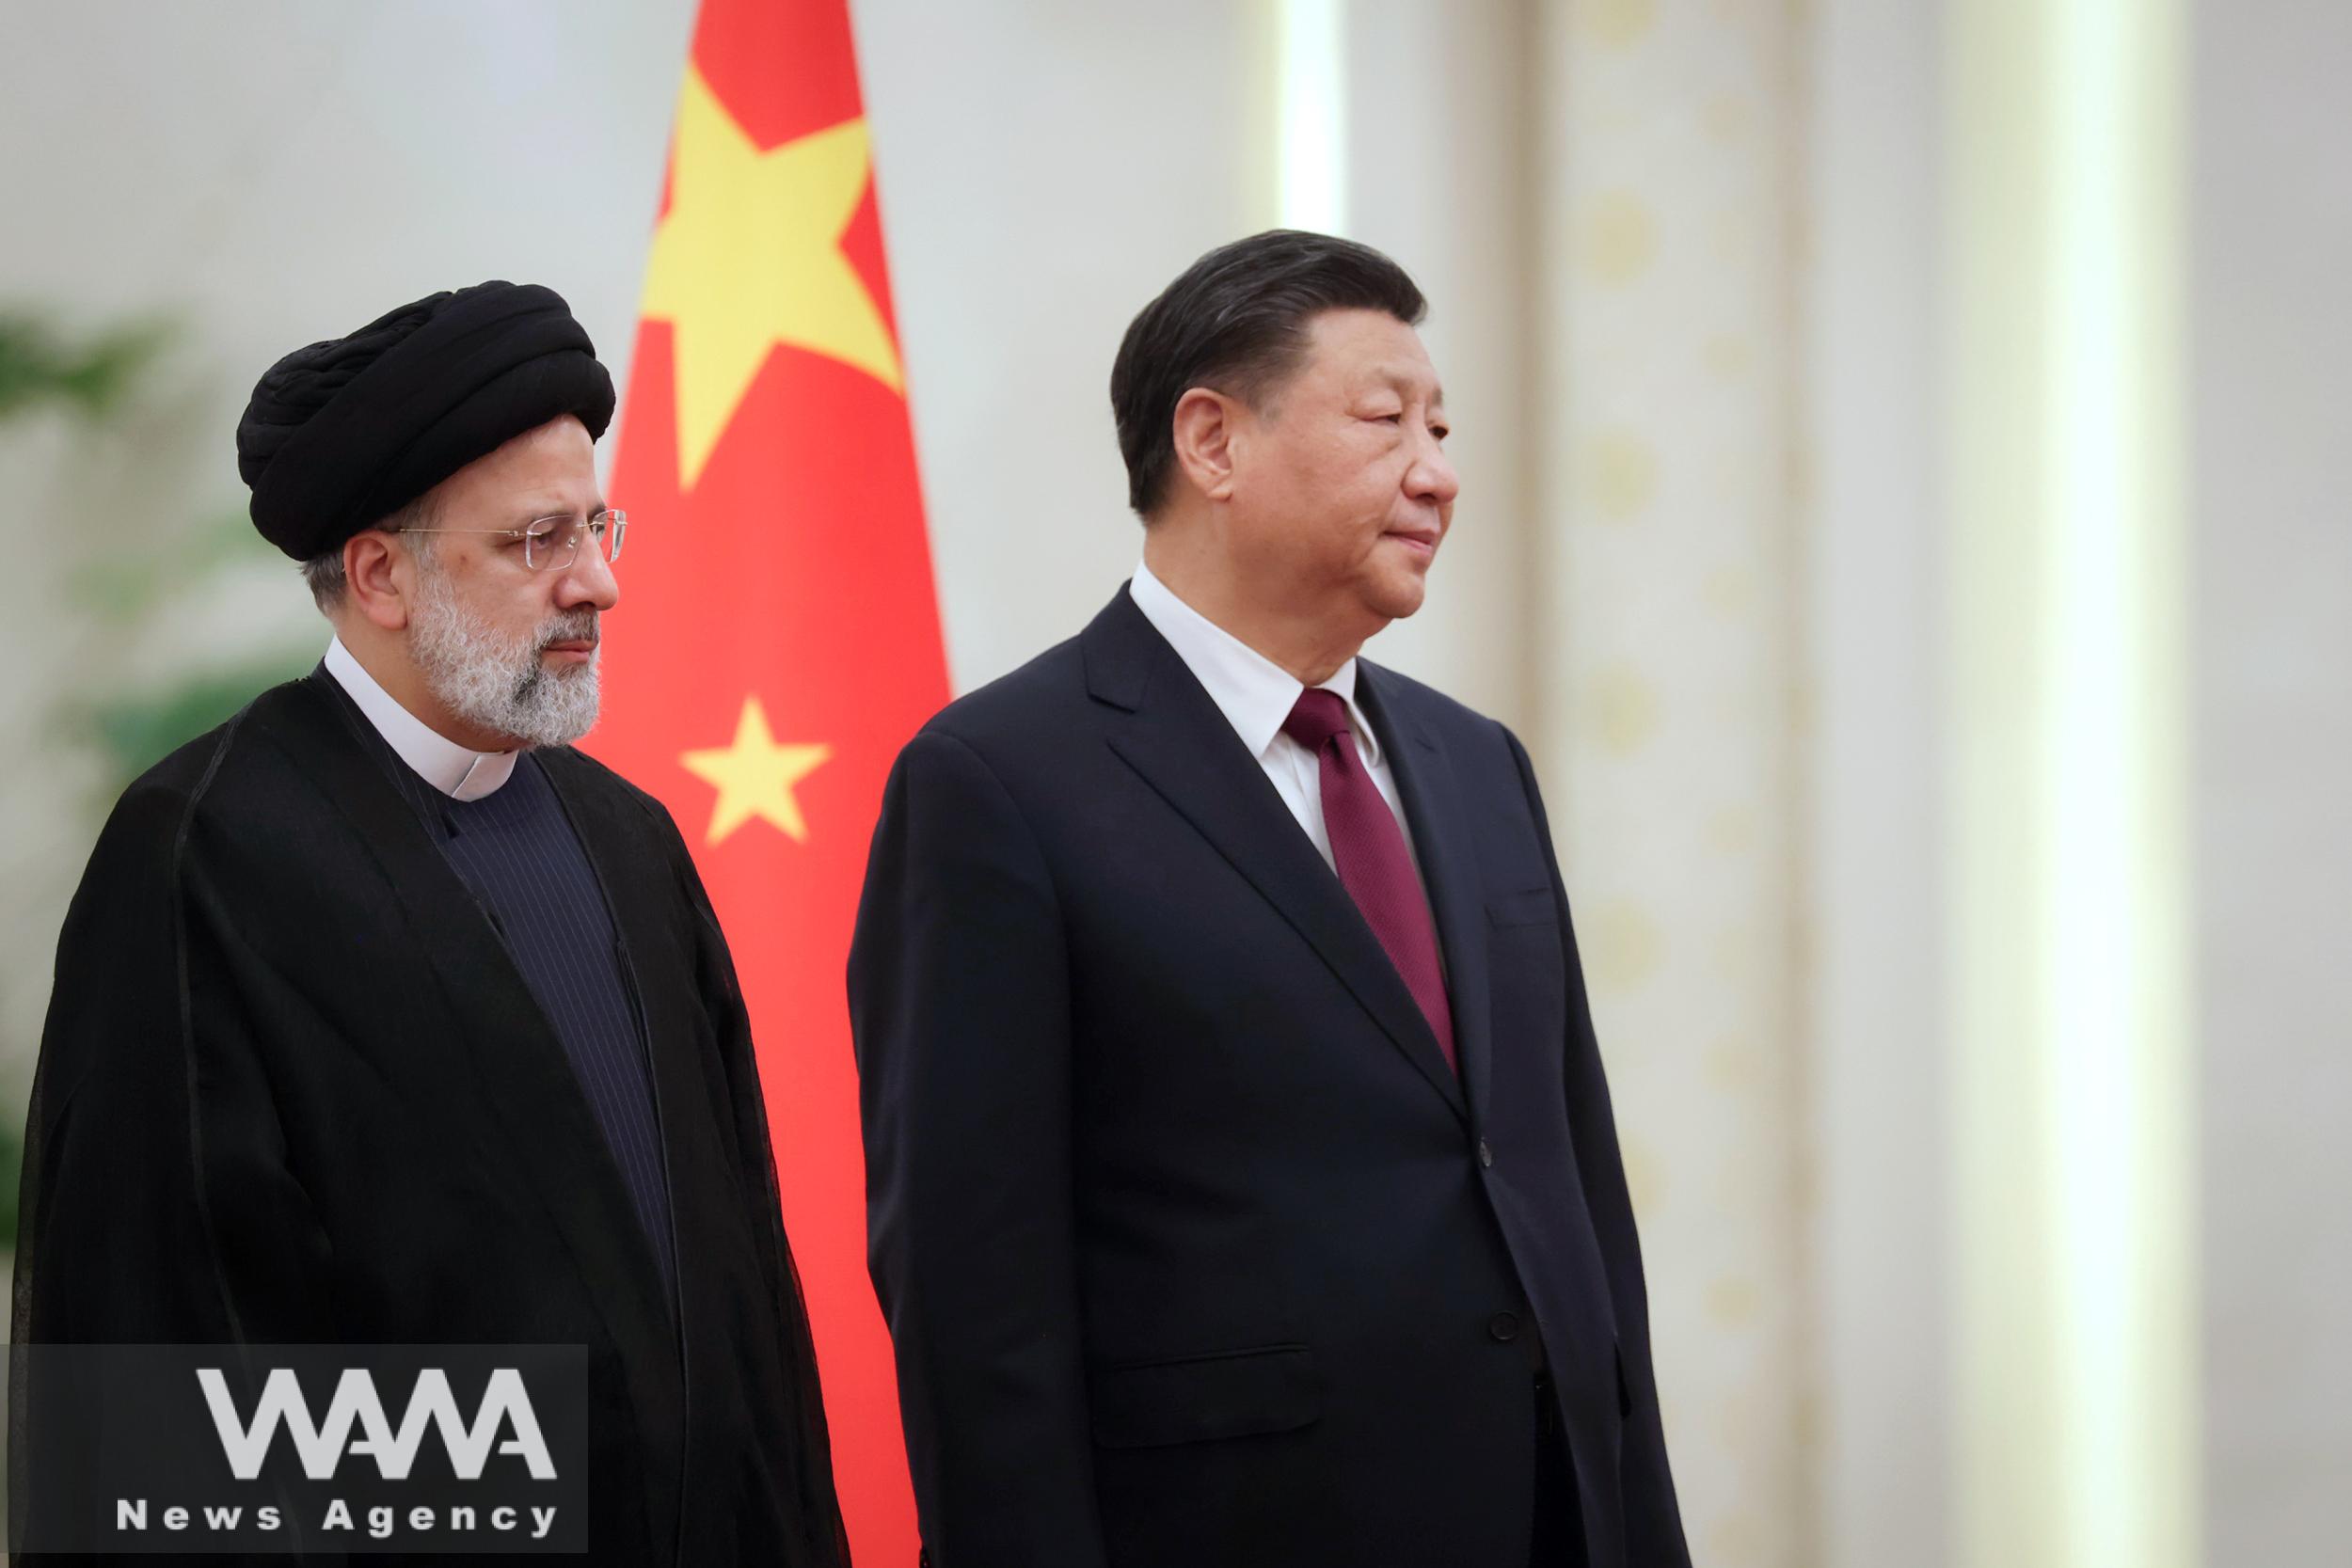 Iranian President Ebrahim Raisi stands next to Chinese President Xi Jinping during a welcoming ceremony in Beijing, China, February 14, 2023. Iran's President Website/WANA (West Asia News Agency)